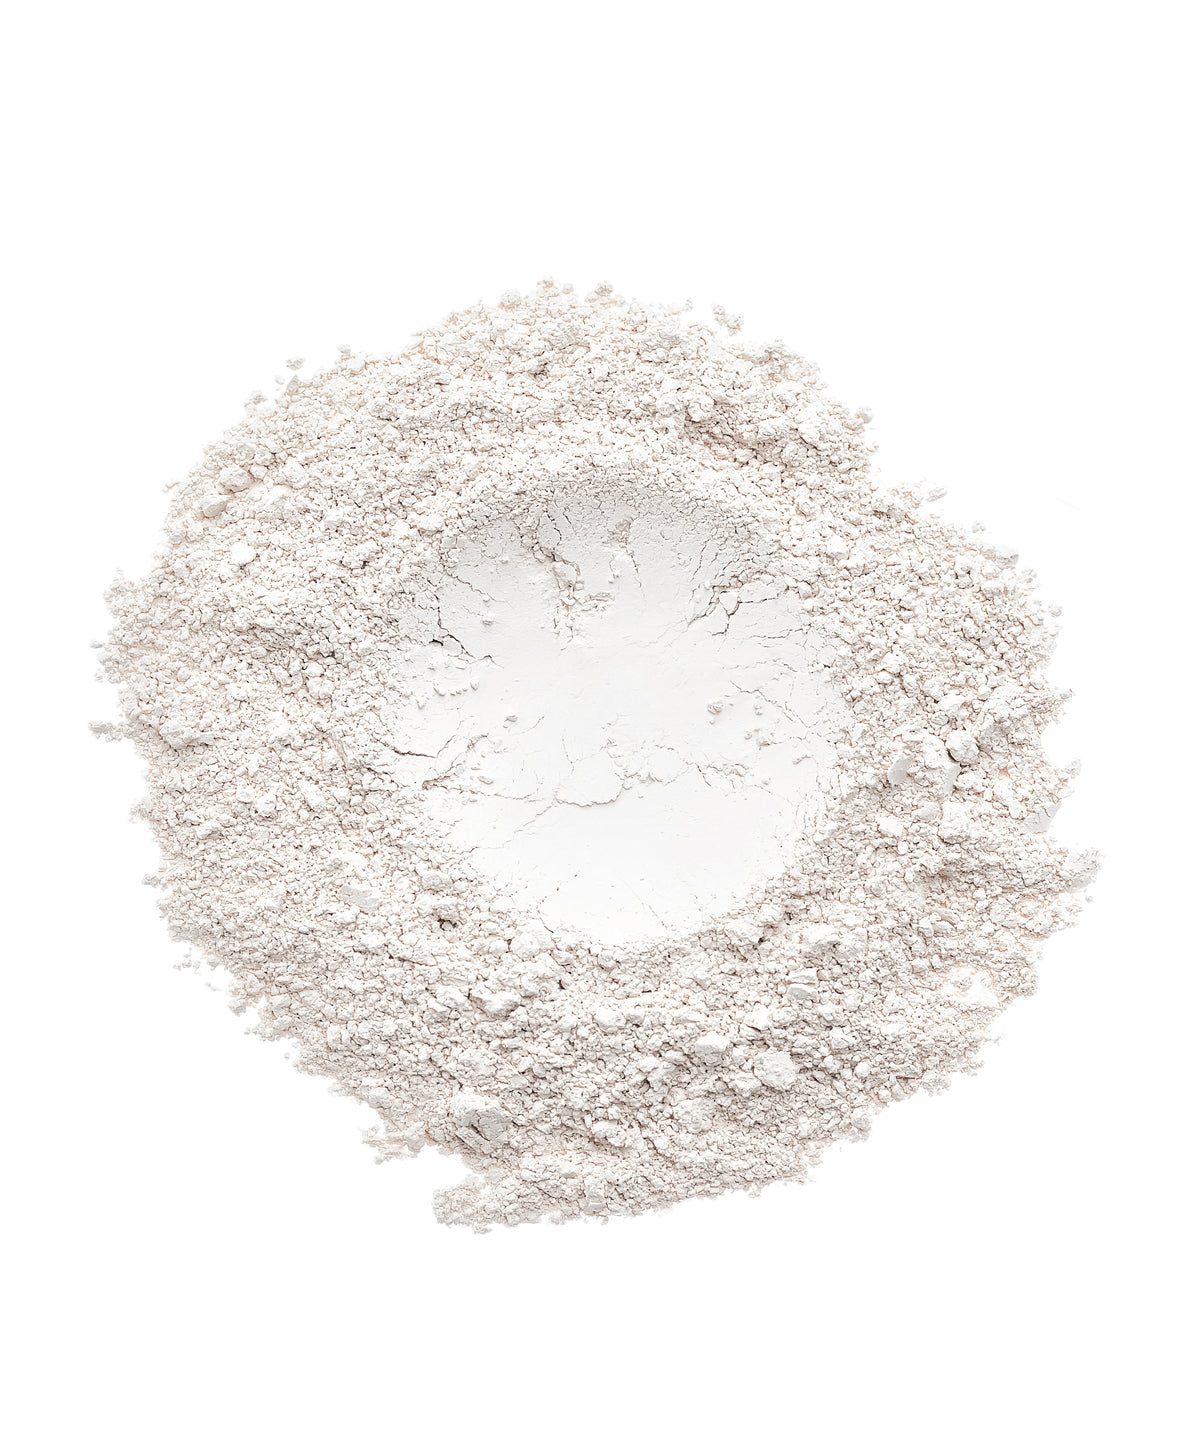 Benefits of Pearl Powder: A powerhouse supplement for eyes, skin